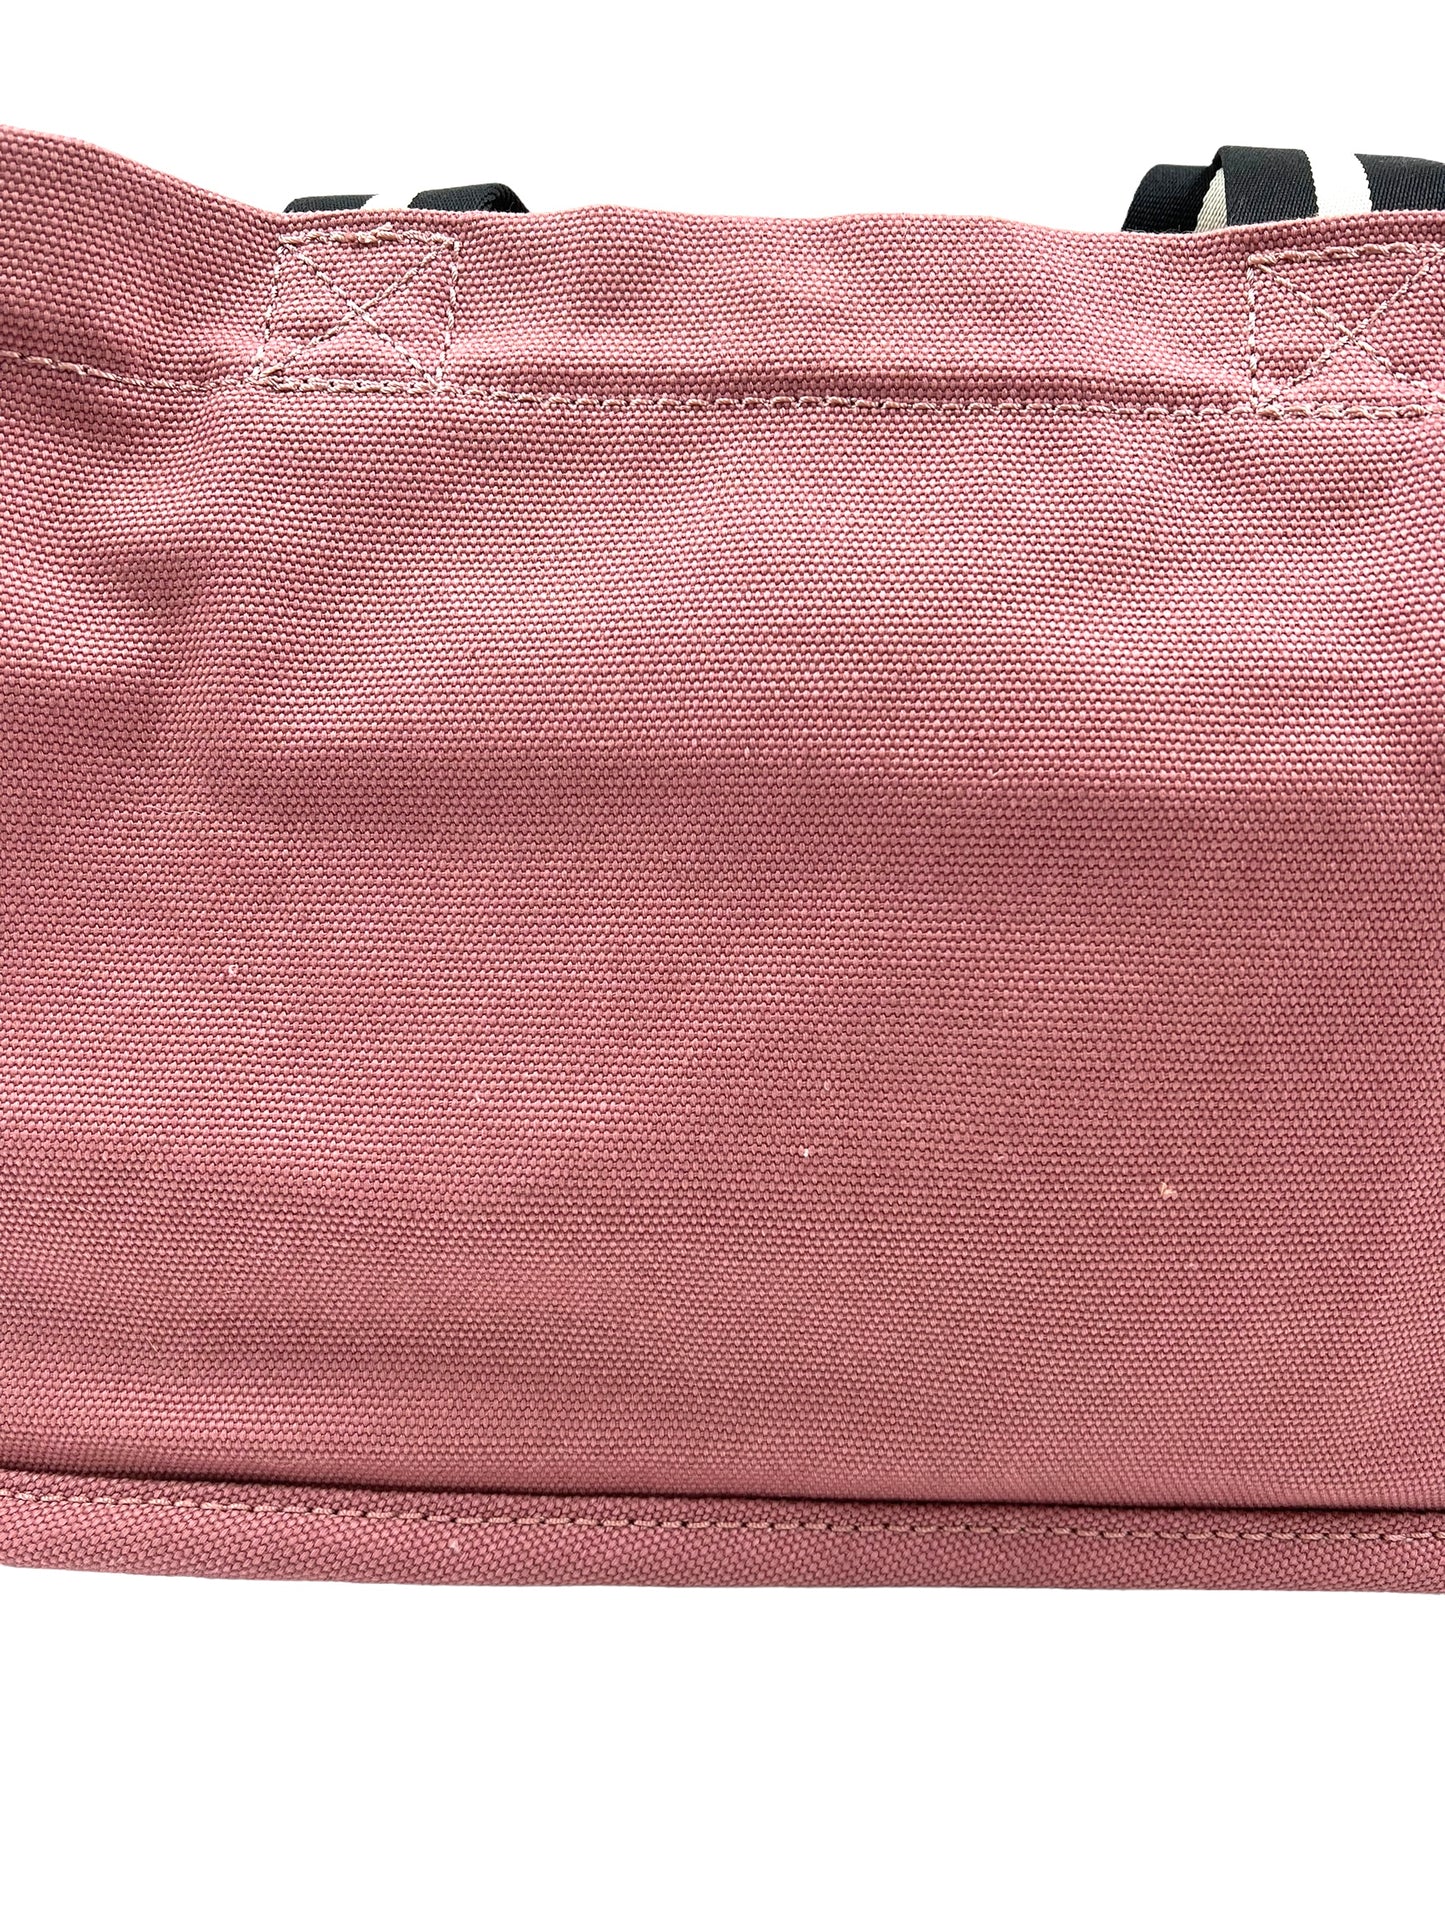 Marc Jacobs Dusty Rose Medium Signet Canvas Tote